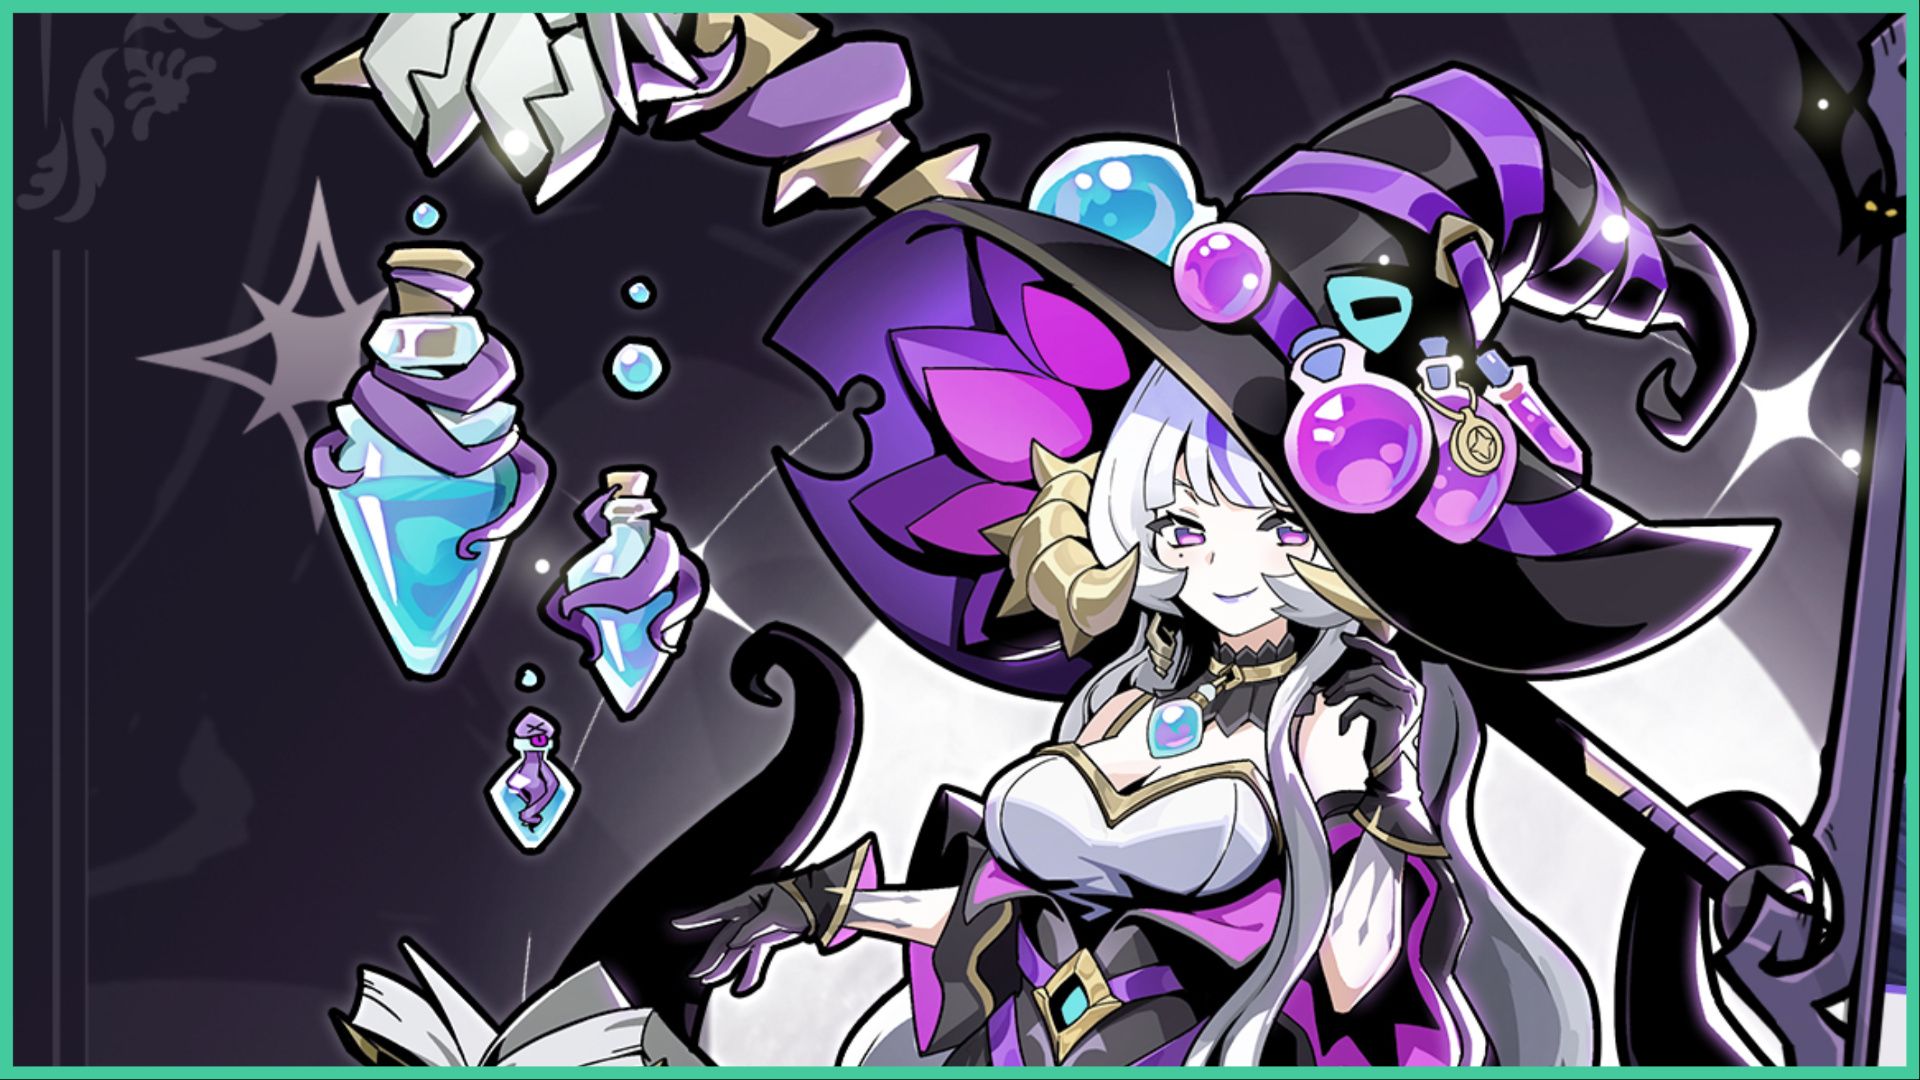 feature image for our monster never cry codes guide, the image features promo art of a witch themed female character who is wearing a large witch hat with various potions attached to it, she has a floating open book by her, and floating potions with bubbles coming out of them as a magical staff is behind her with a bat to the right